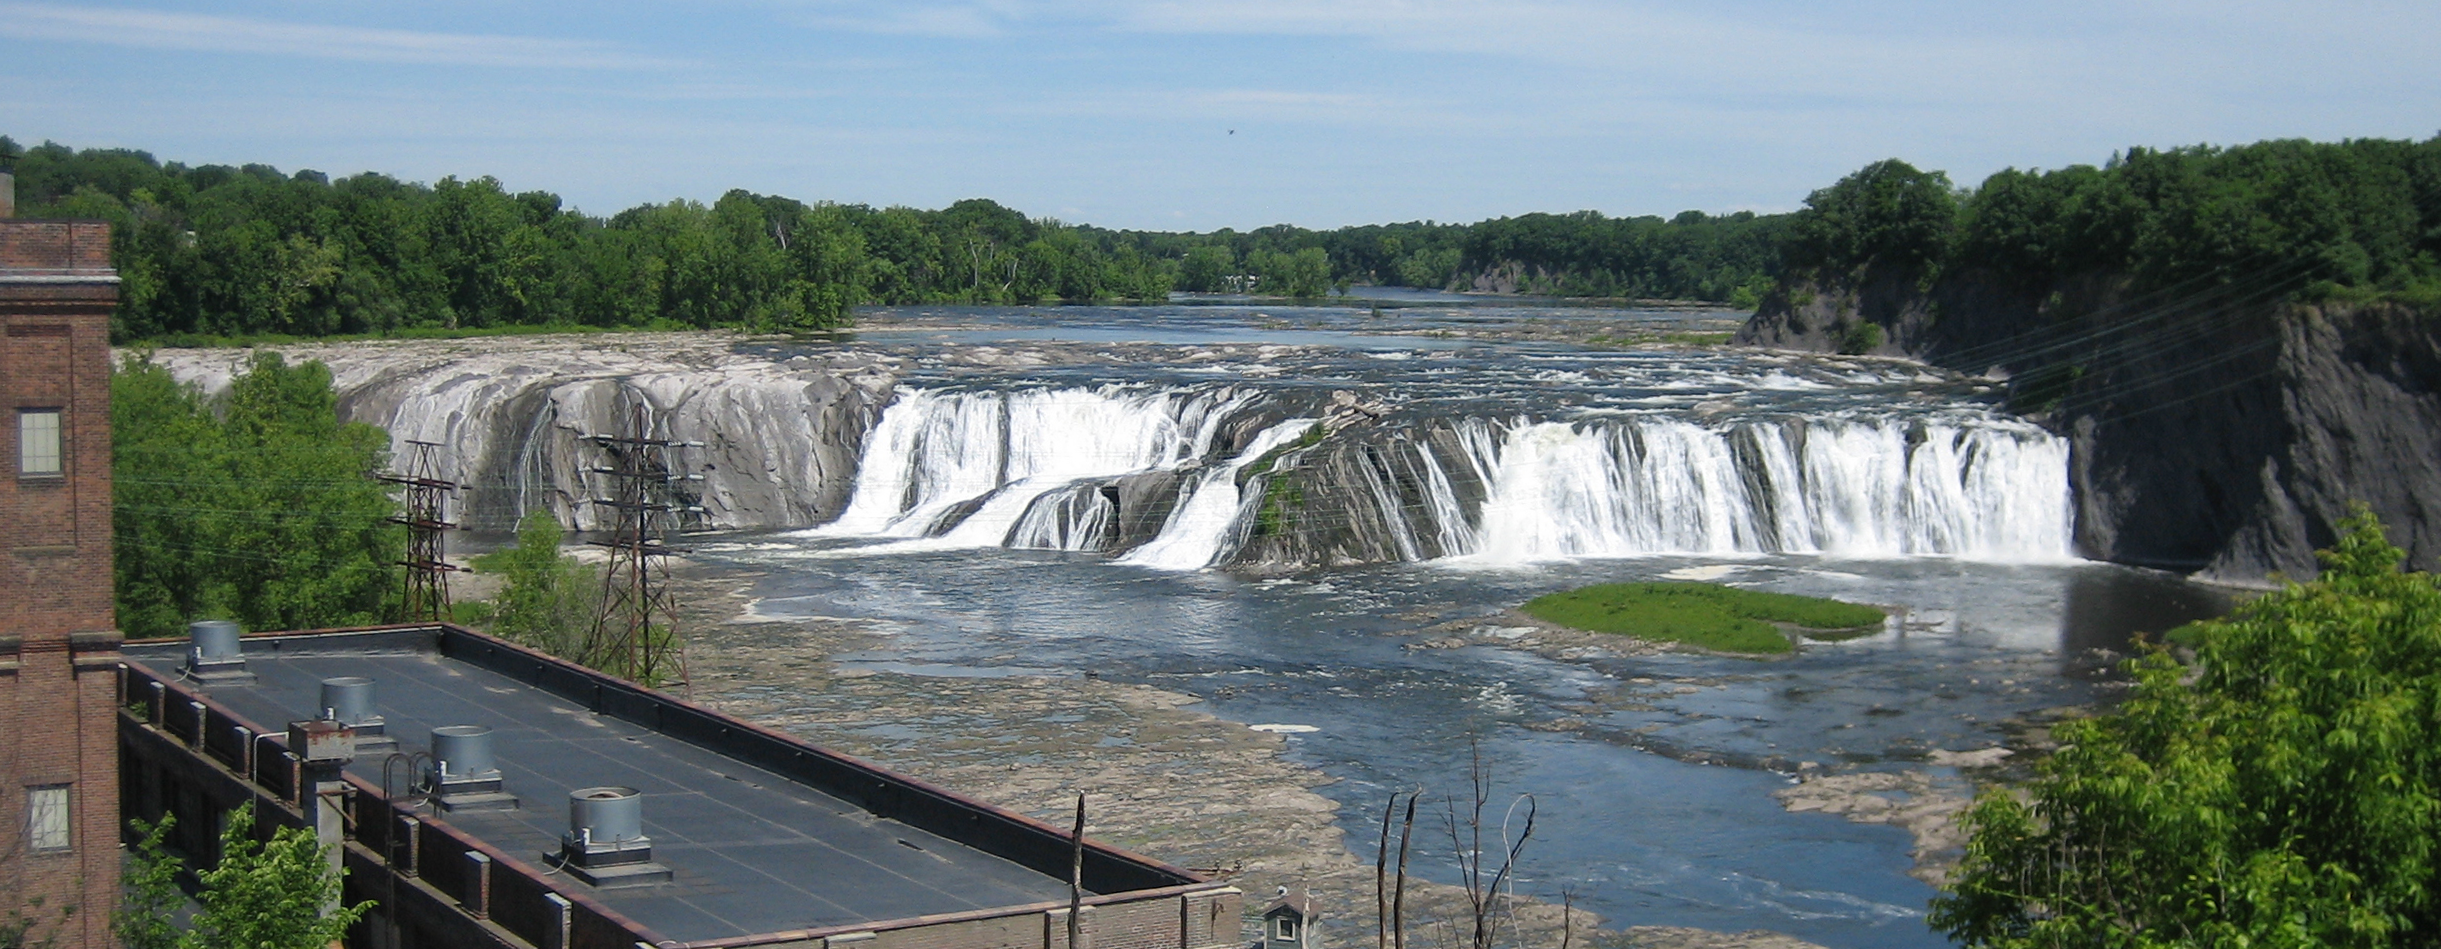 Cohoes Falls in June